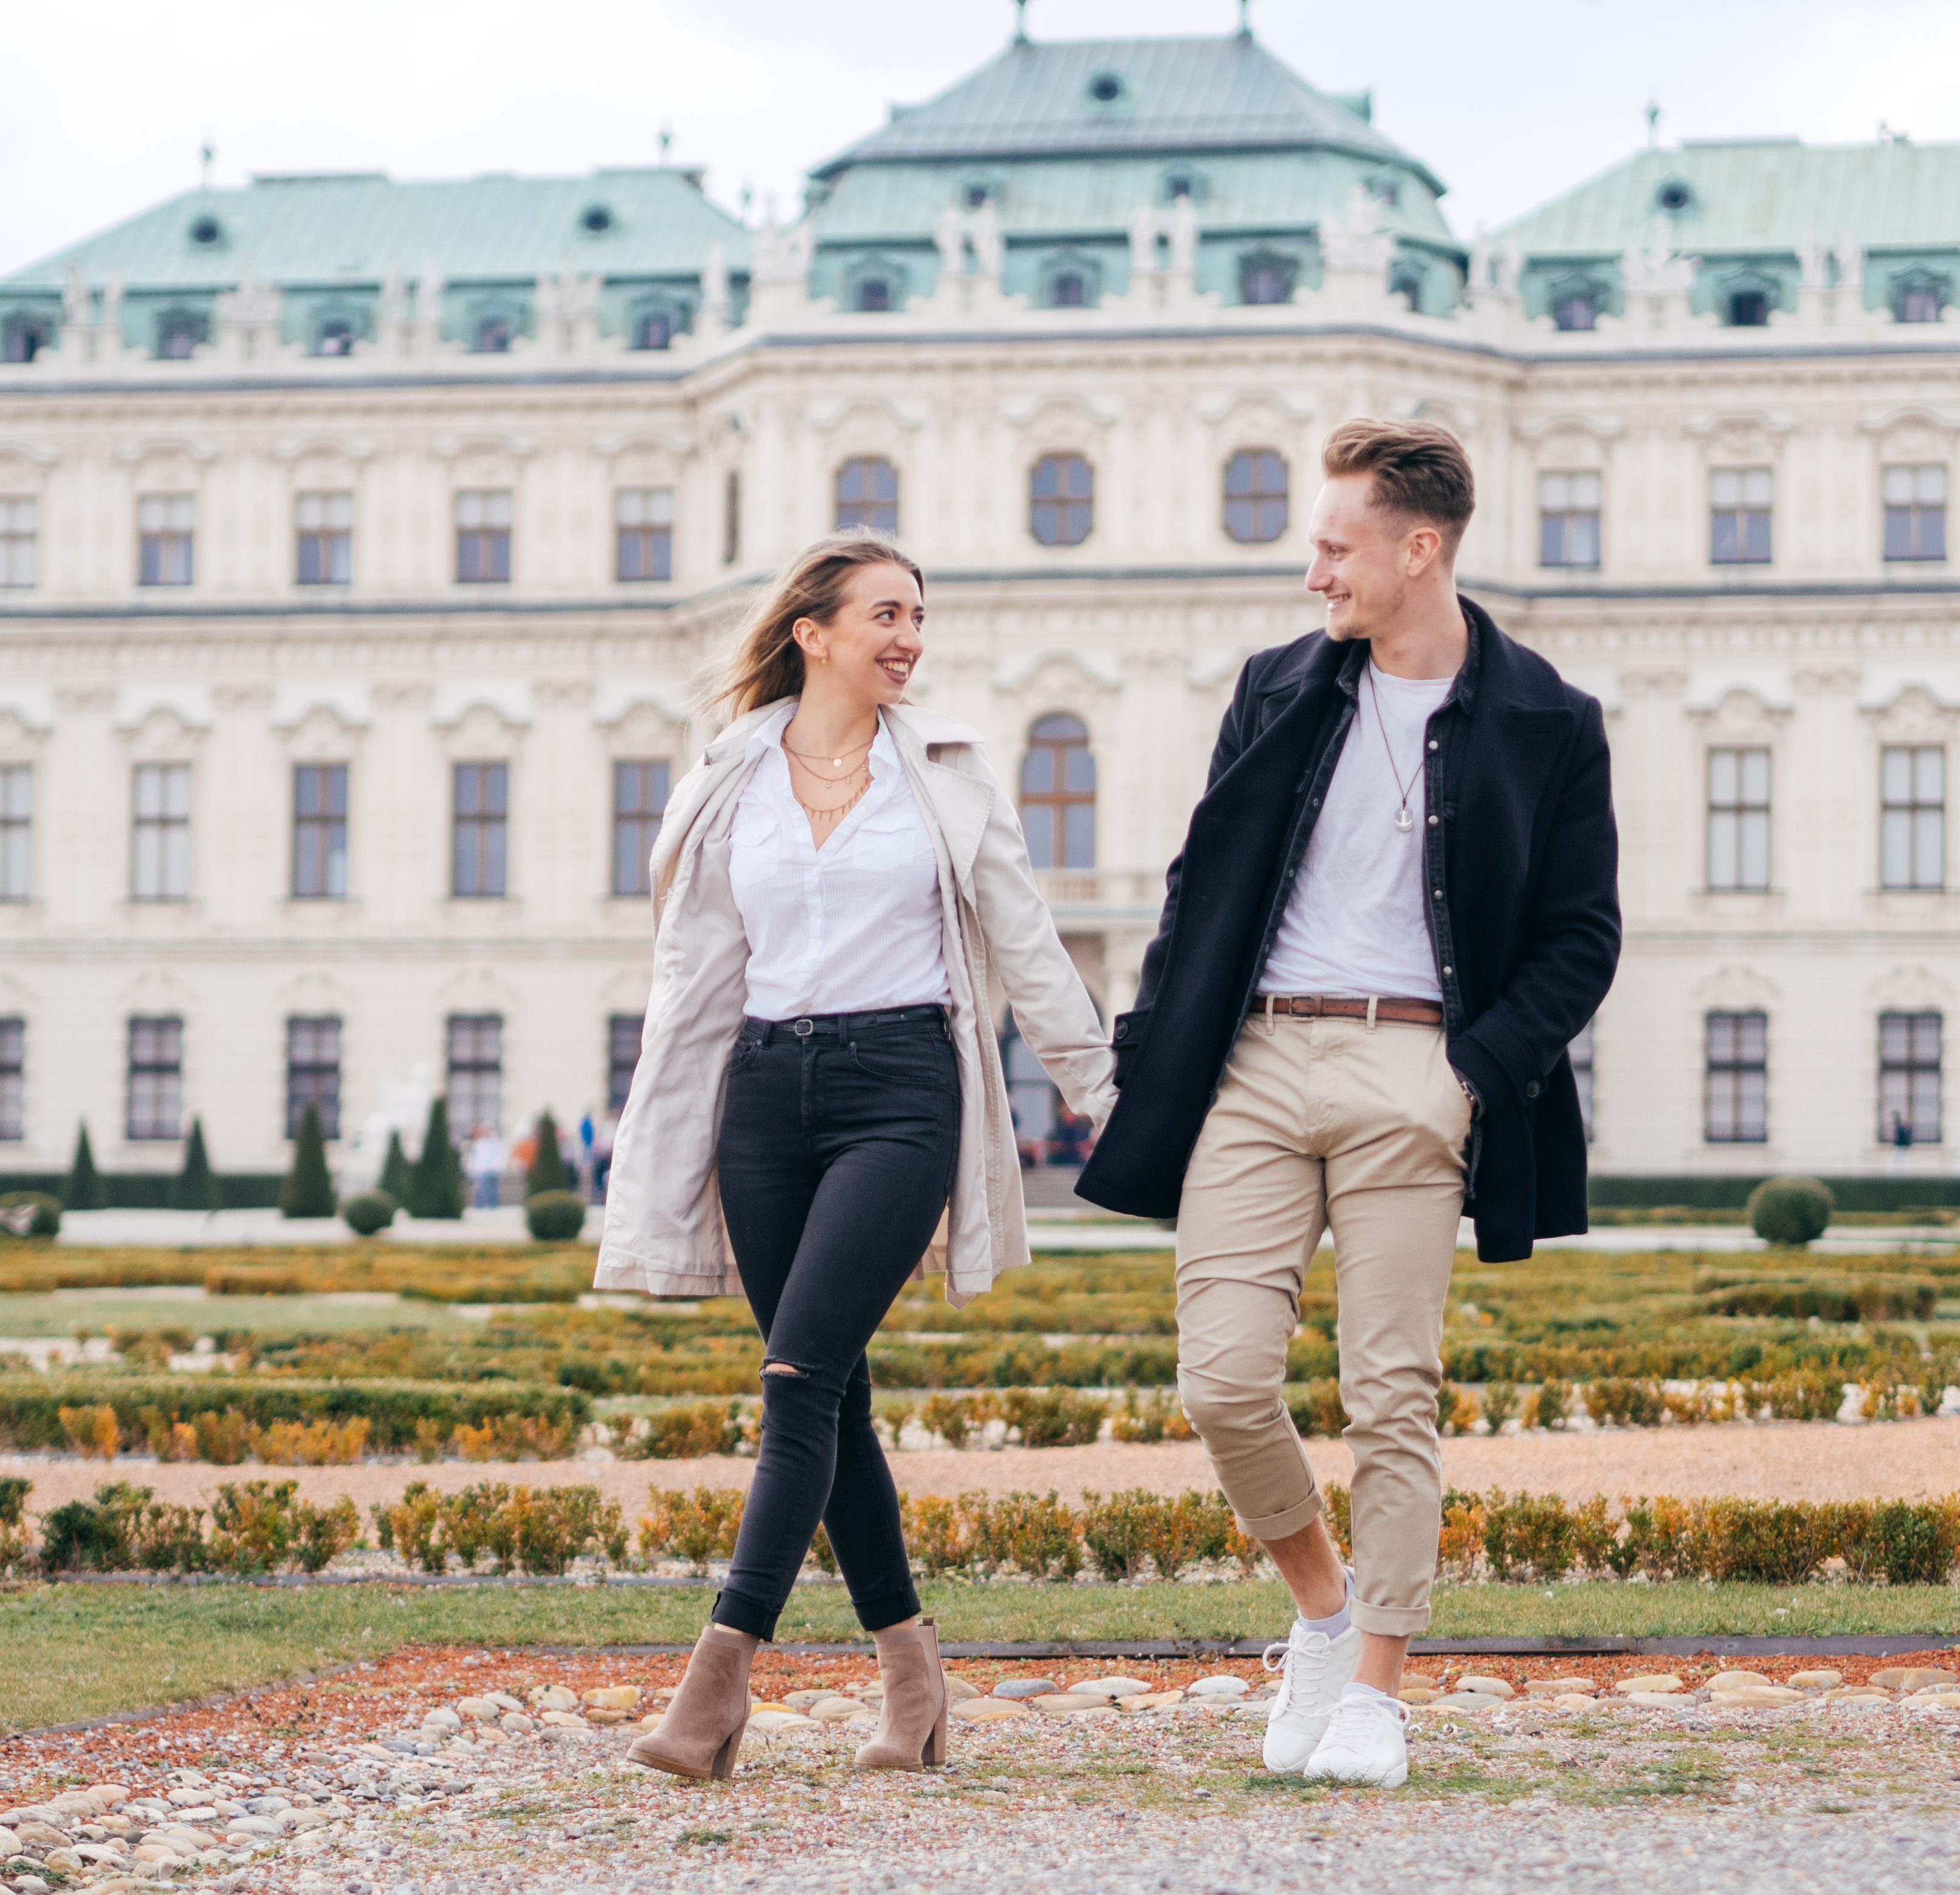 Belvedere Love story - Vienna couple photography engagement